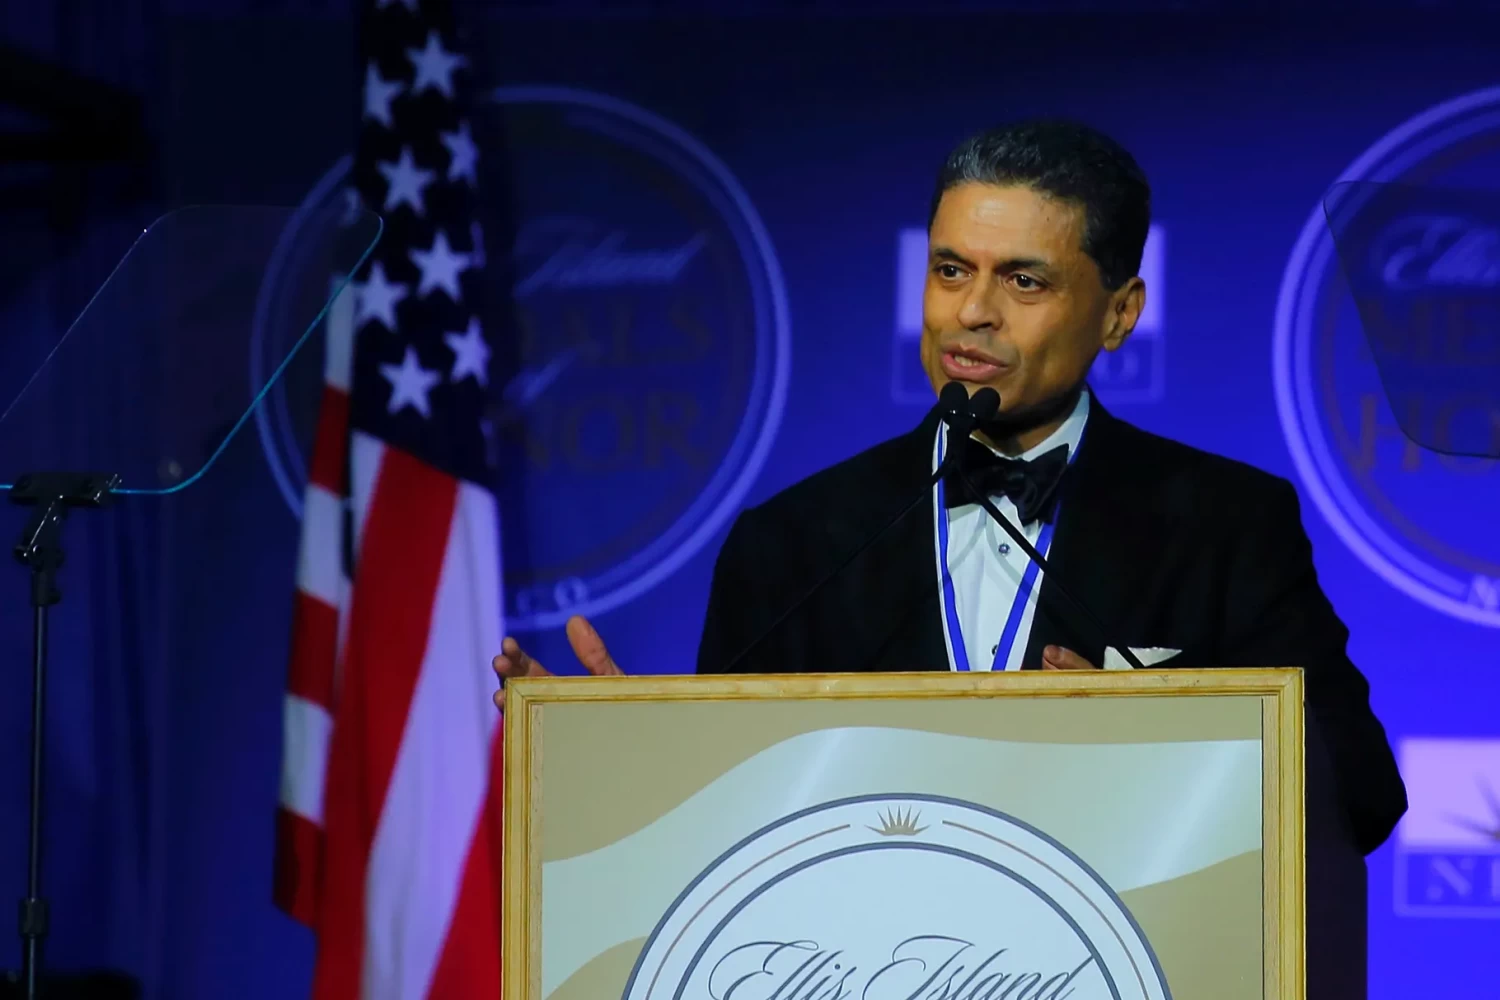 Journalist Fareed Zakaria speaks during the Ellis Island Medals of Honor ceremony at the Ellis Island Honors Society meeting in New York on May 13, 2017. Kena Betancur/AFP via Getty Images